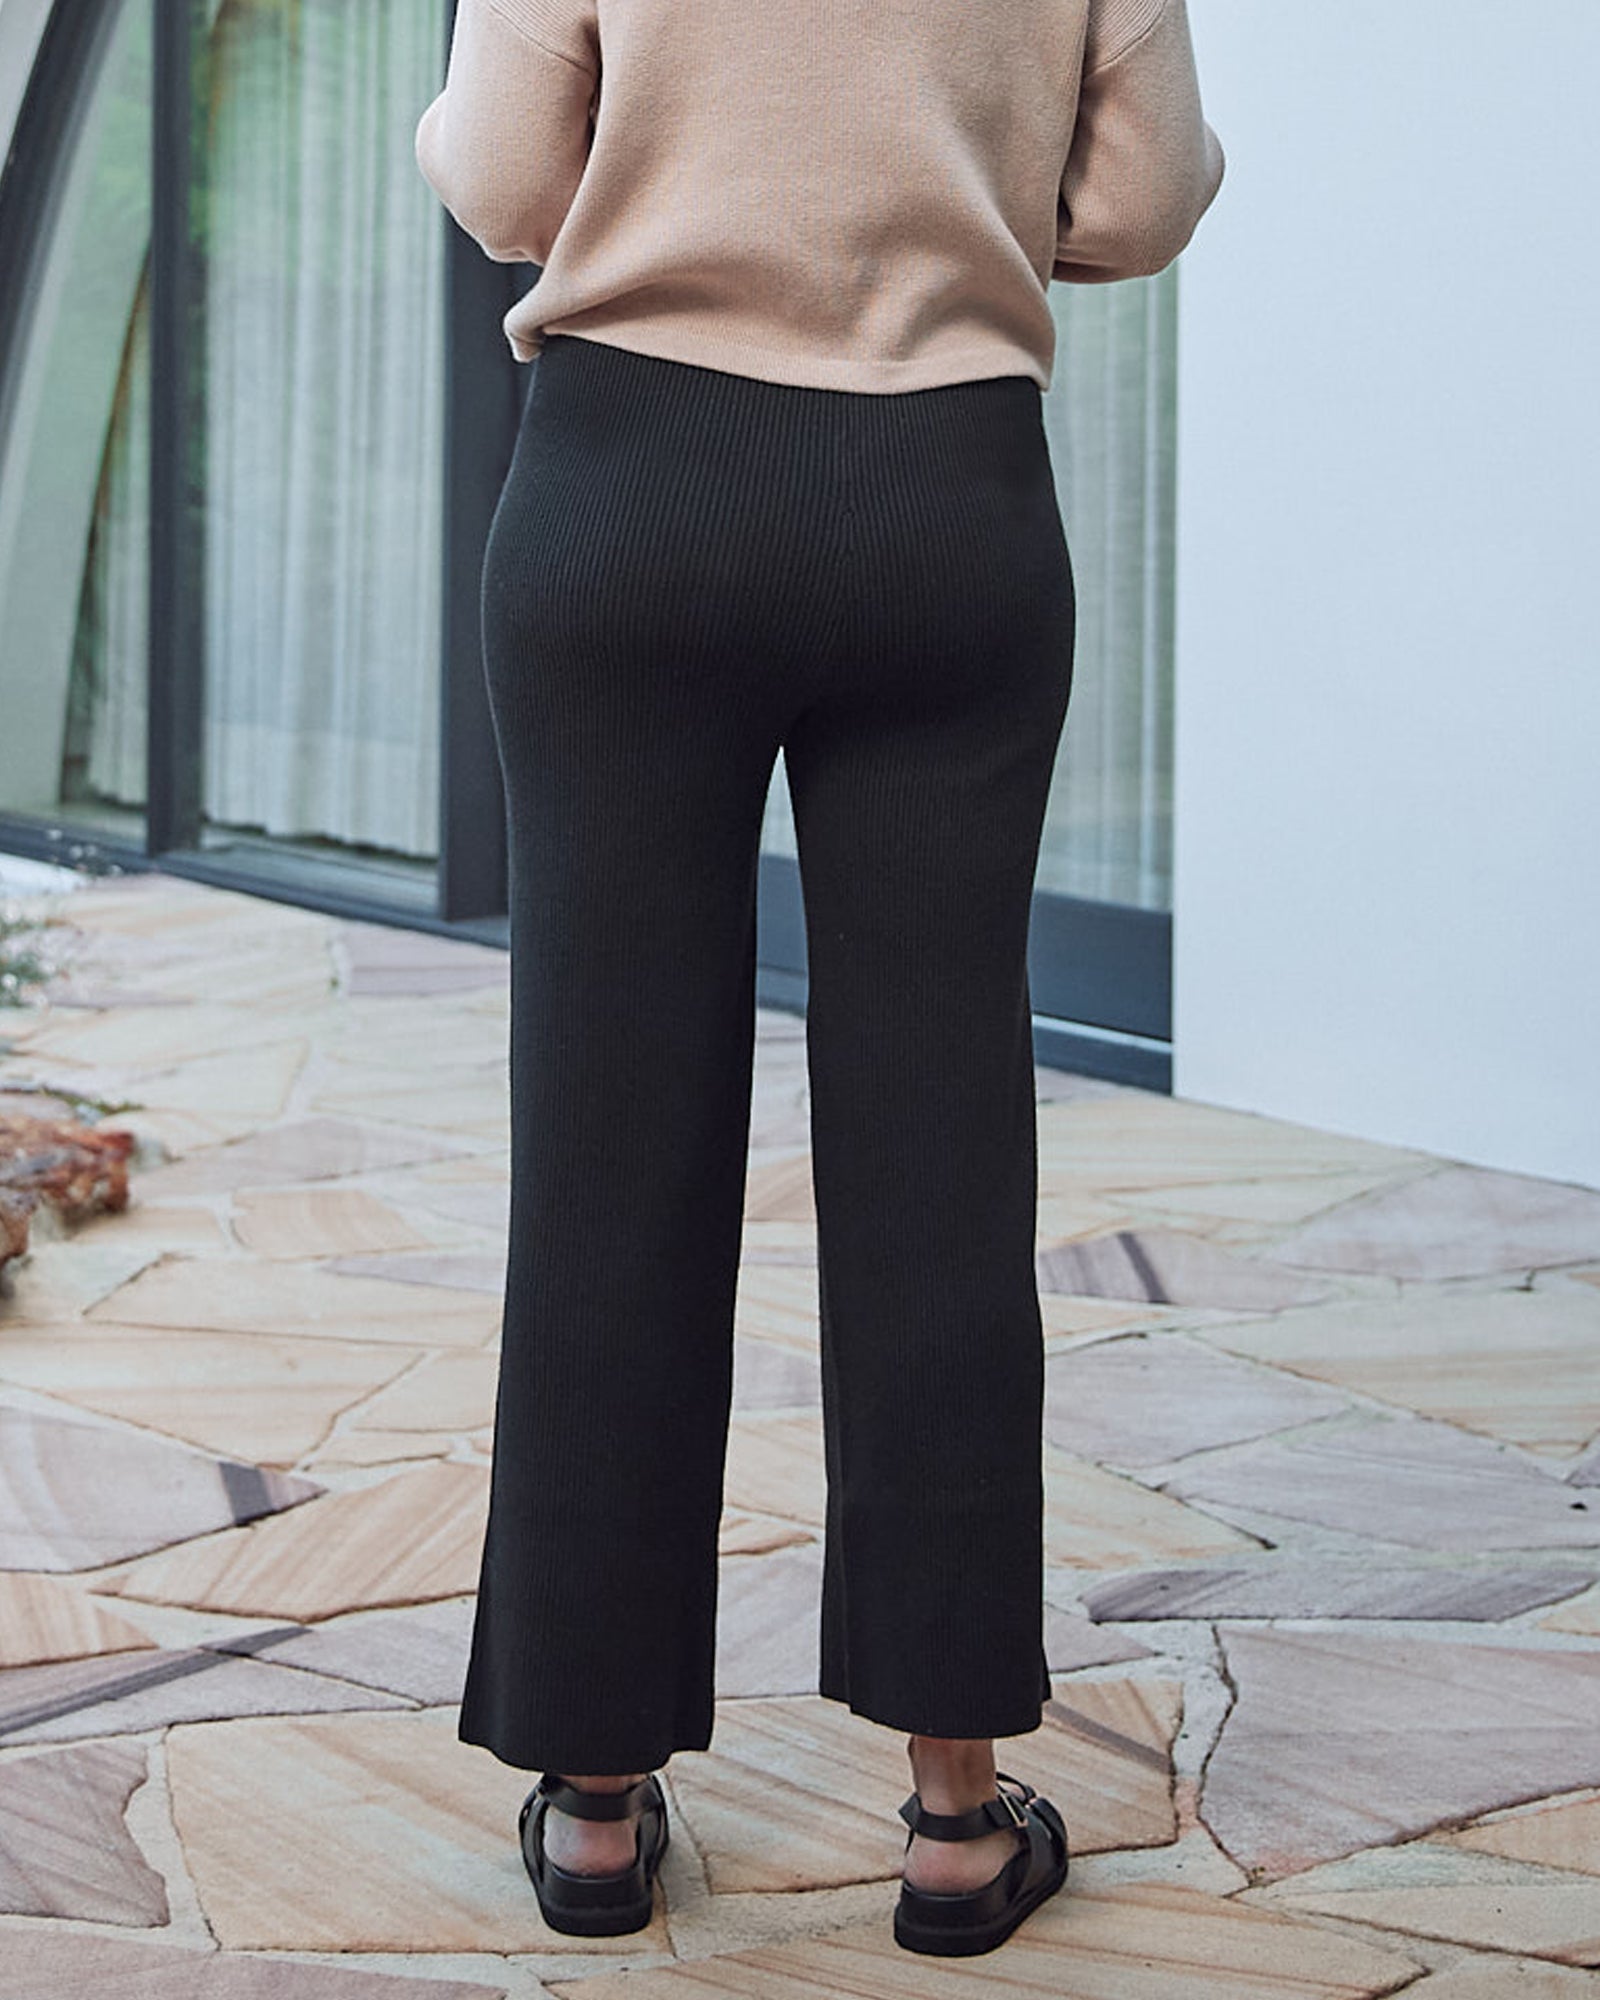 Back view- maternity knitted lounge pants black